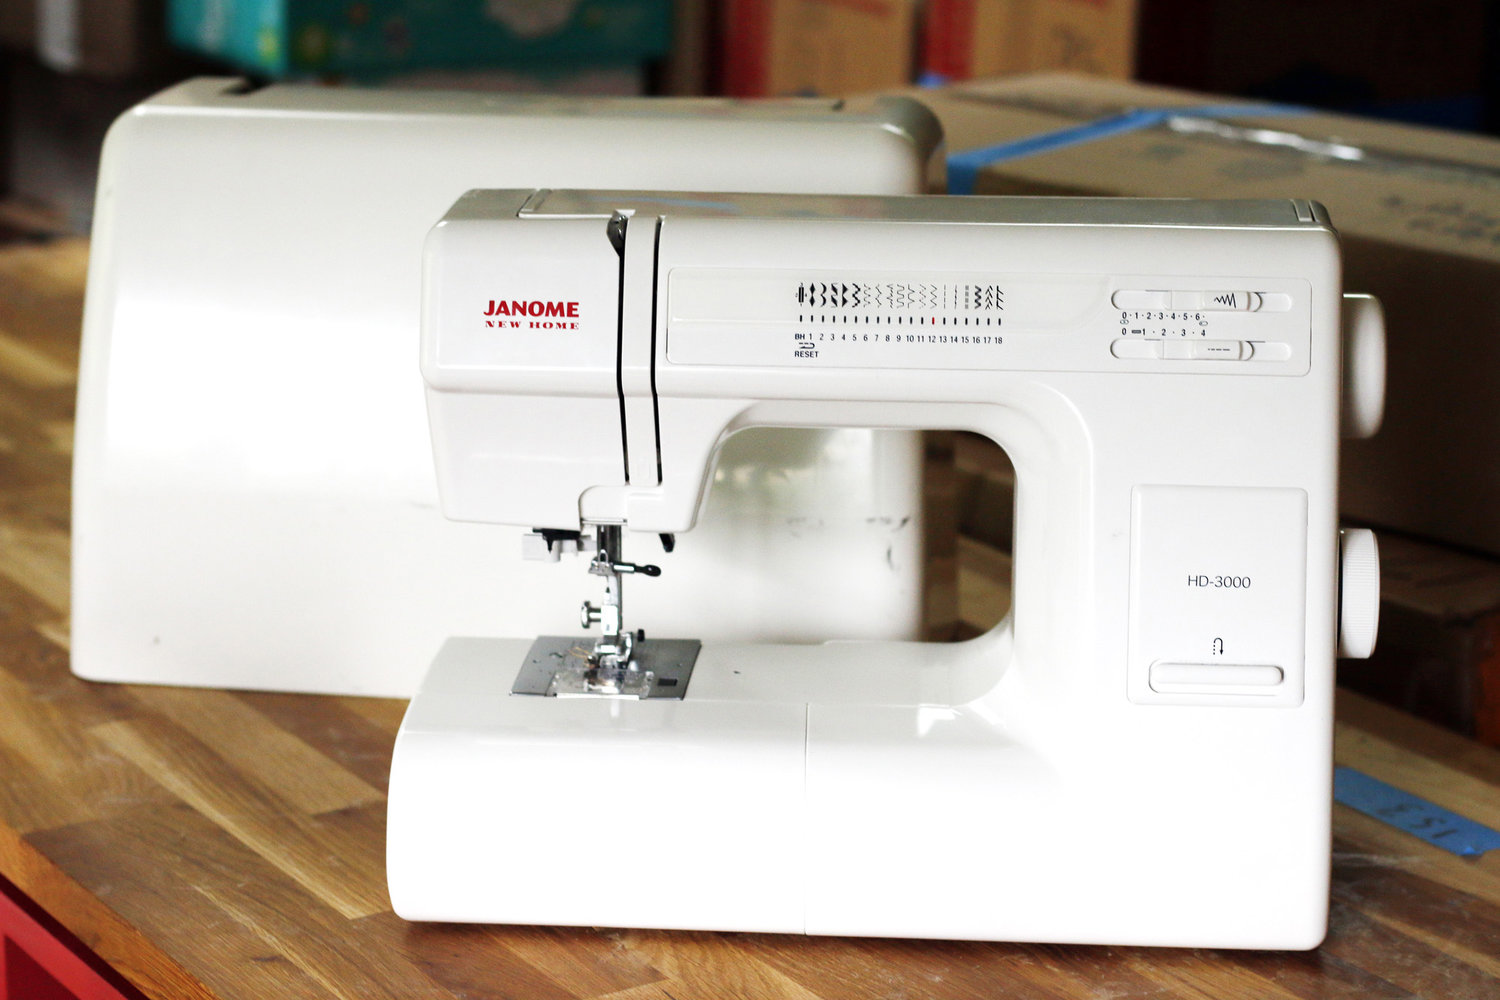 Discover the Top 11 Juki Sewing Machines of 2019